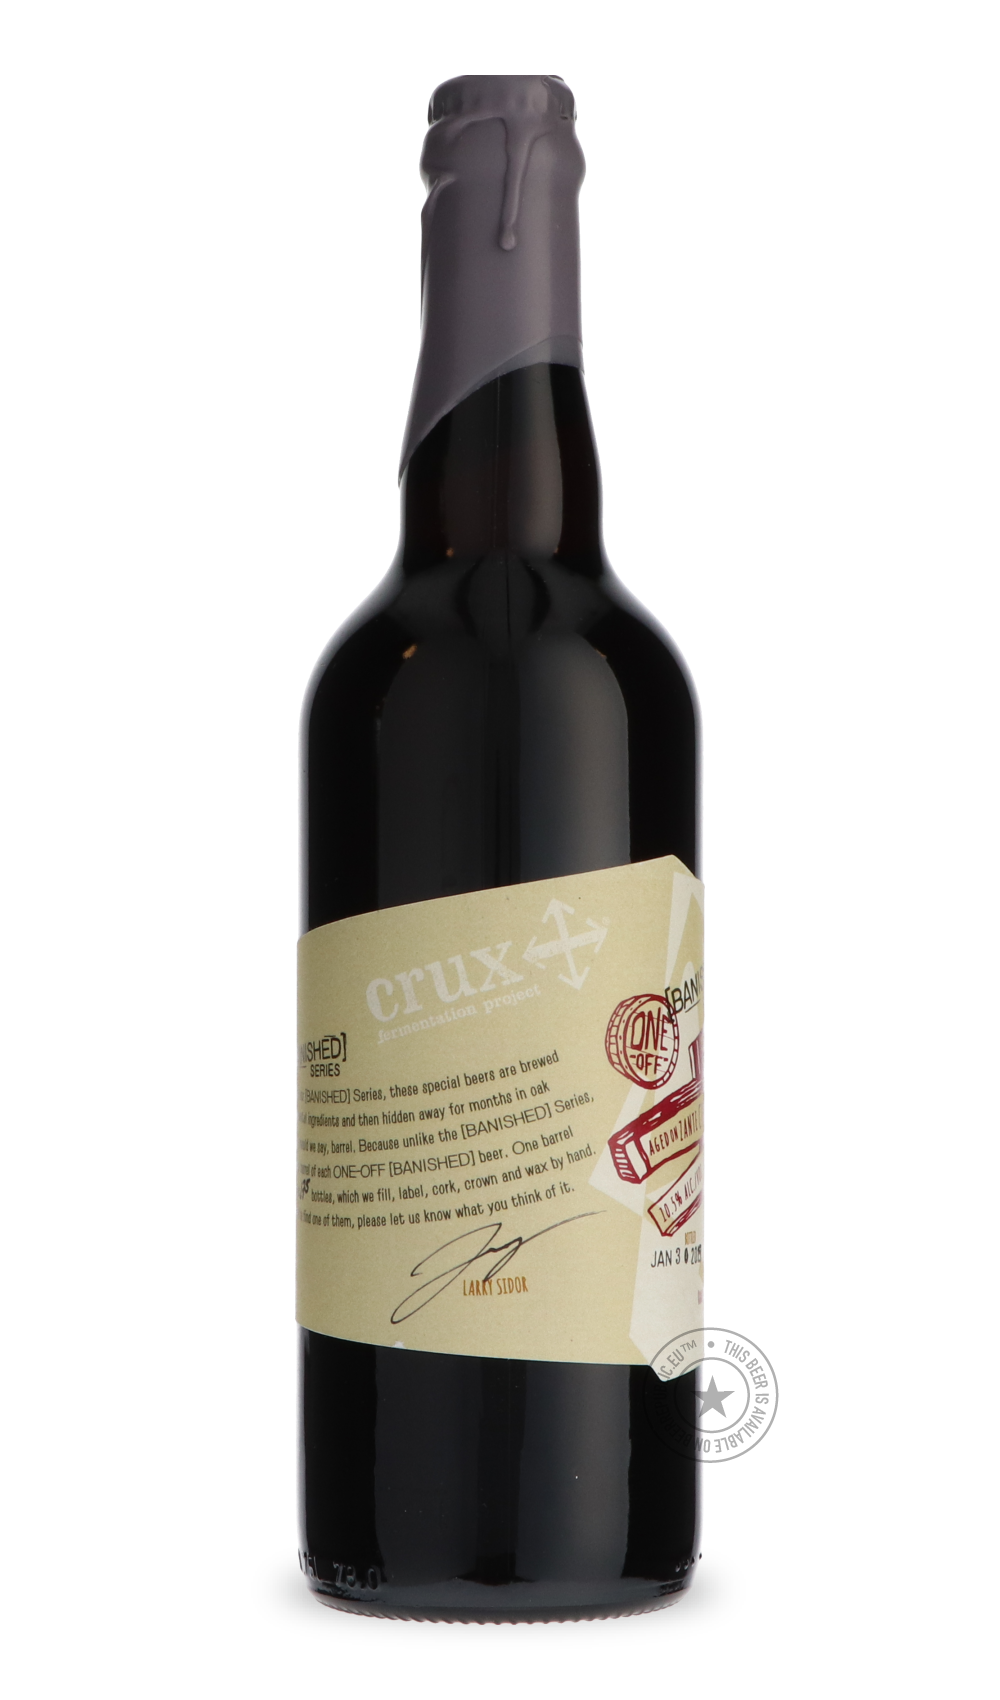 -Crux- Freakcake Bourbon Barrel Aged On Zante Currants-Sour / Wild & Fruity- Only @ Beer Republic - The best online beer store for American & Canadian craft beer - Buy beer online from the USA and Canada - Bier online kopen - Amerikaans bier kopen - Craft beer store - Craft beer kopen - Amerikanisch bier kaufen - Bier online kaufen - Acheter biere online - IPA - Stout - Porter - New England IPA - Hazy IPA - Imperial Stout - Barrel Aged - Barrel Aged Imperial Stout - Brown - Dark beer - Blond - Blonde - Pils